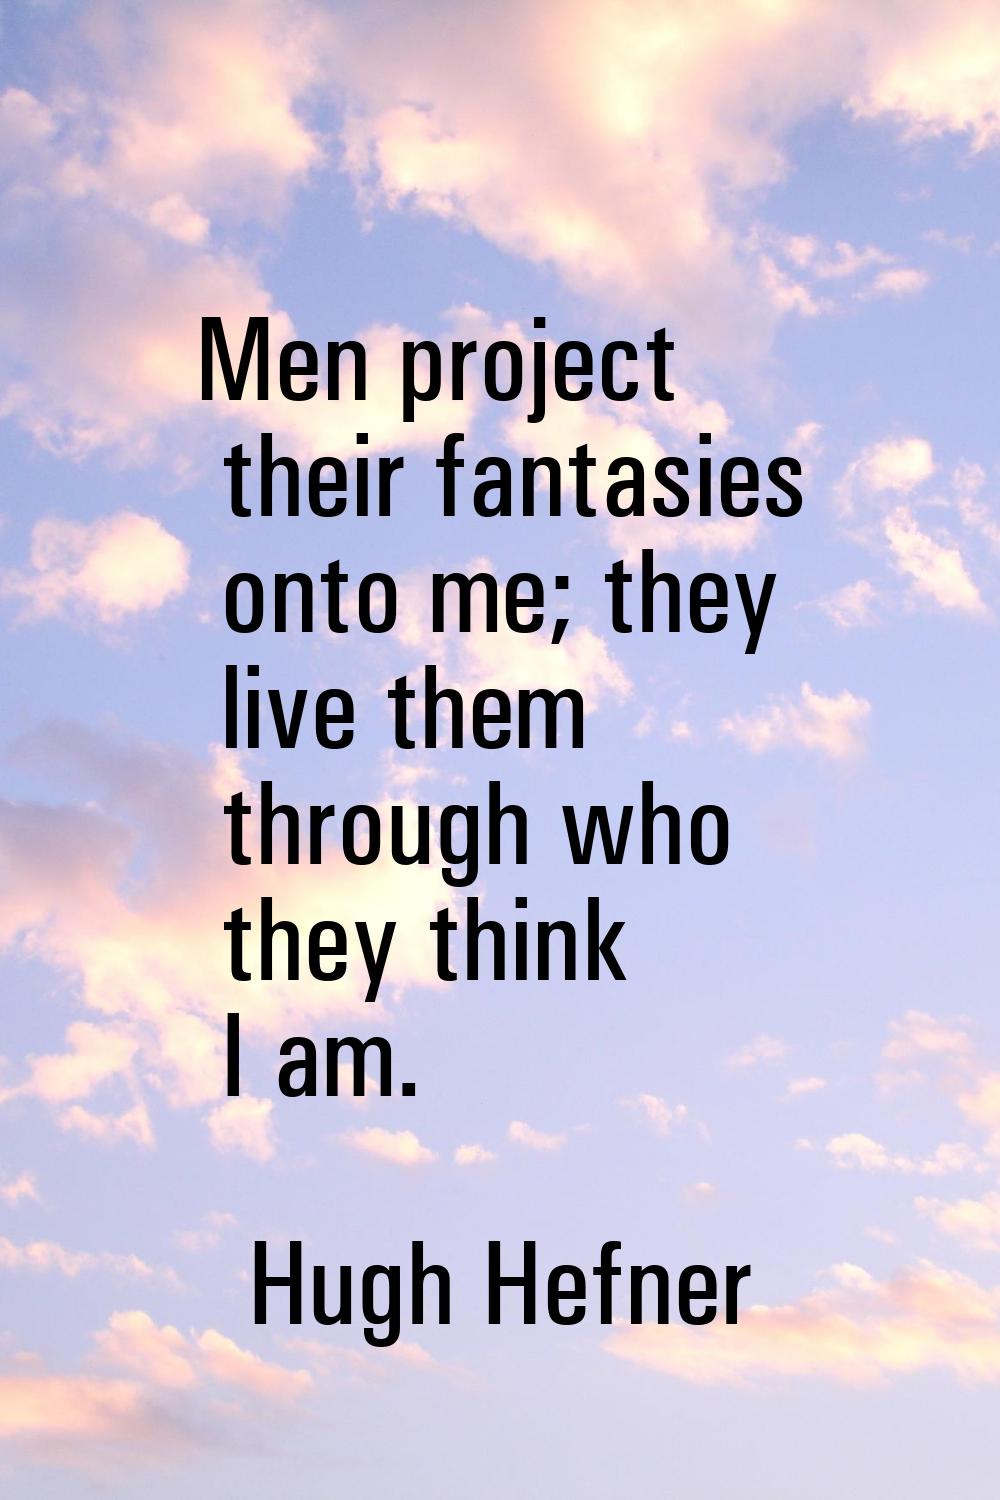 Men project their fantasies onto me; they live them through who they think I am.